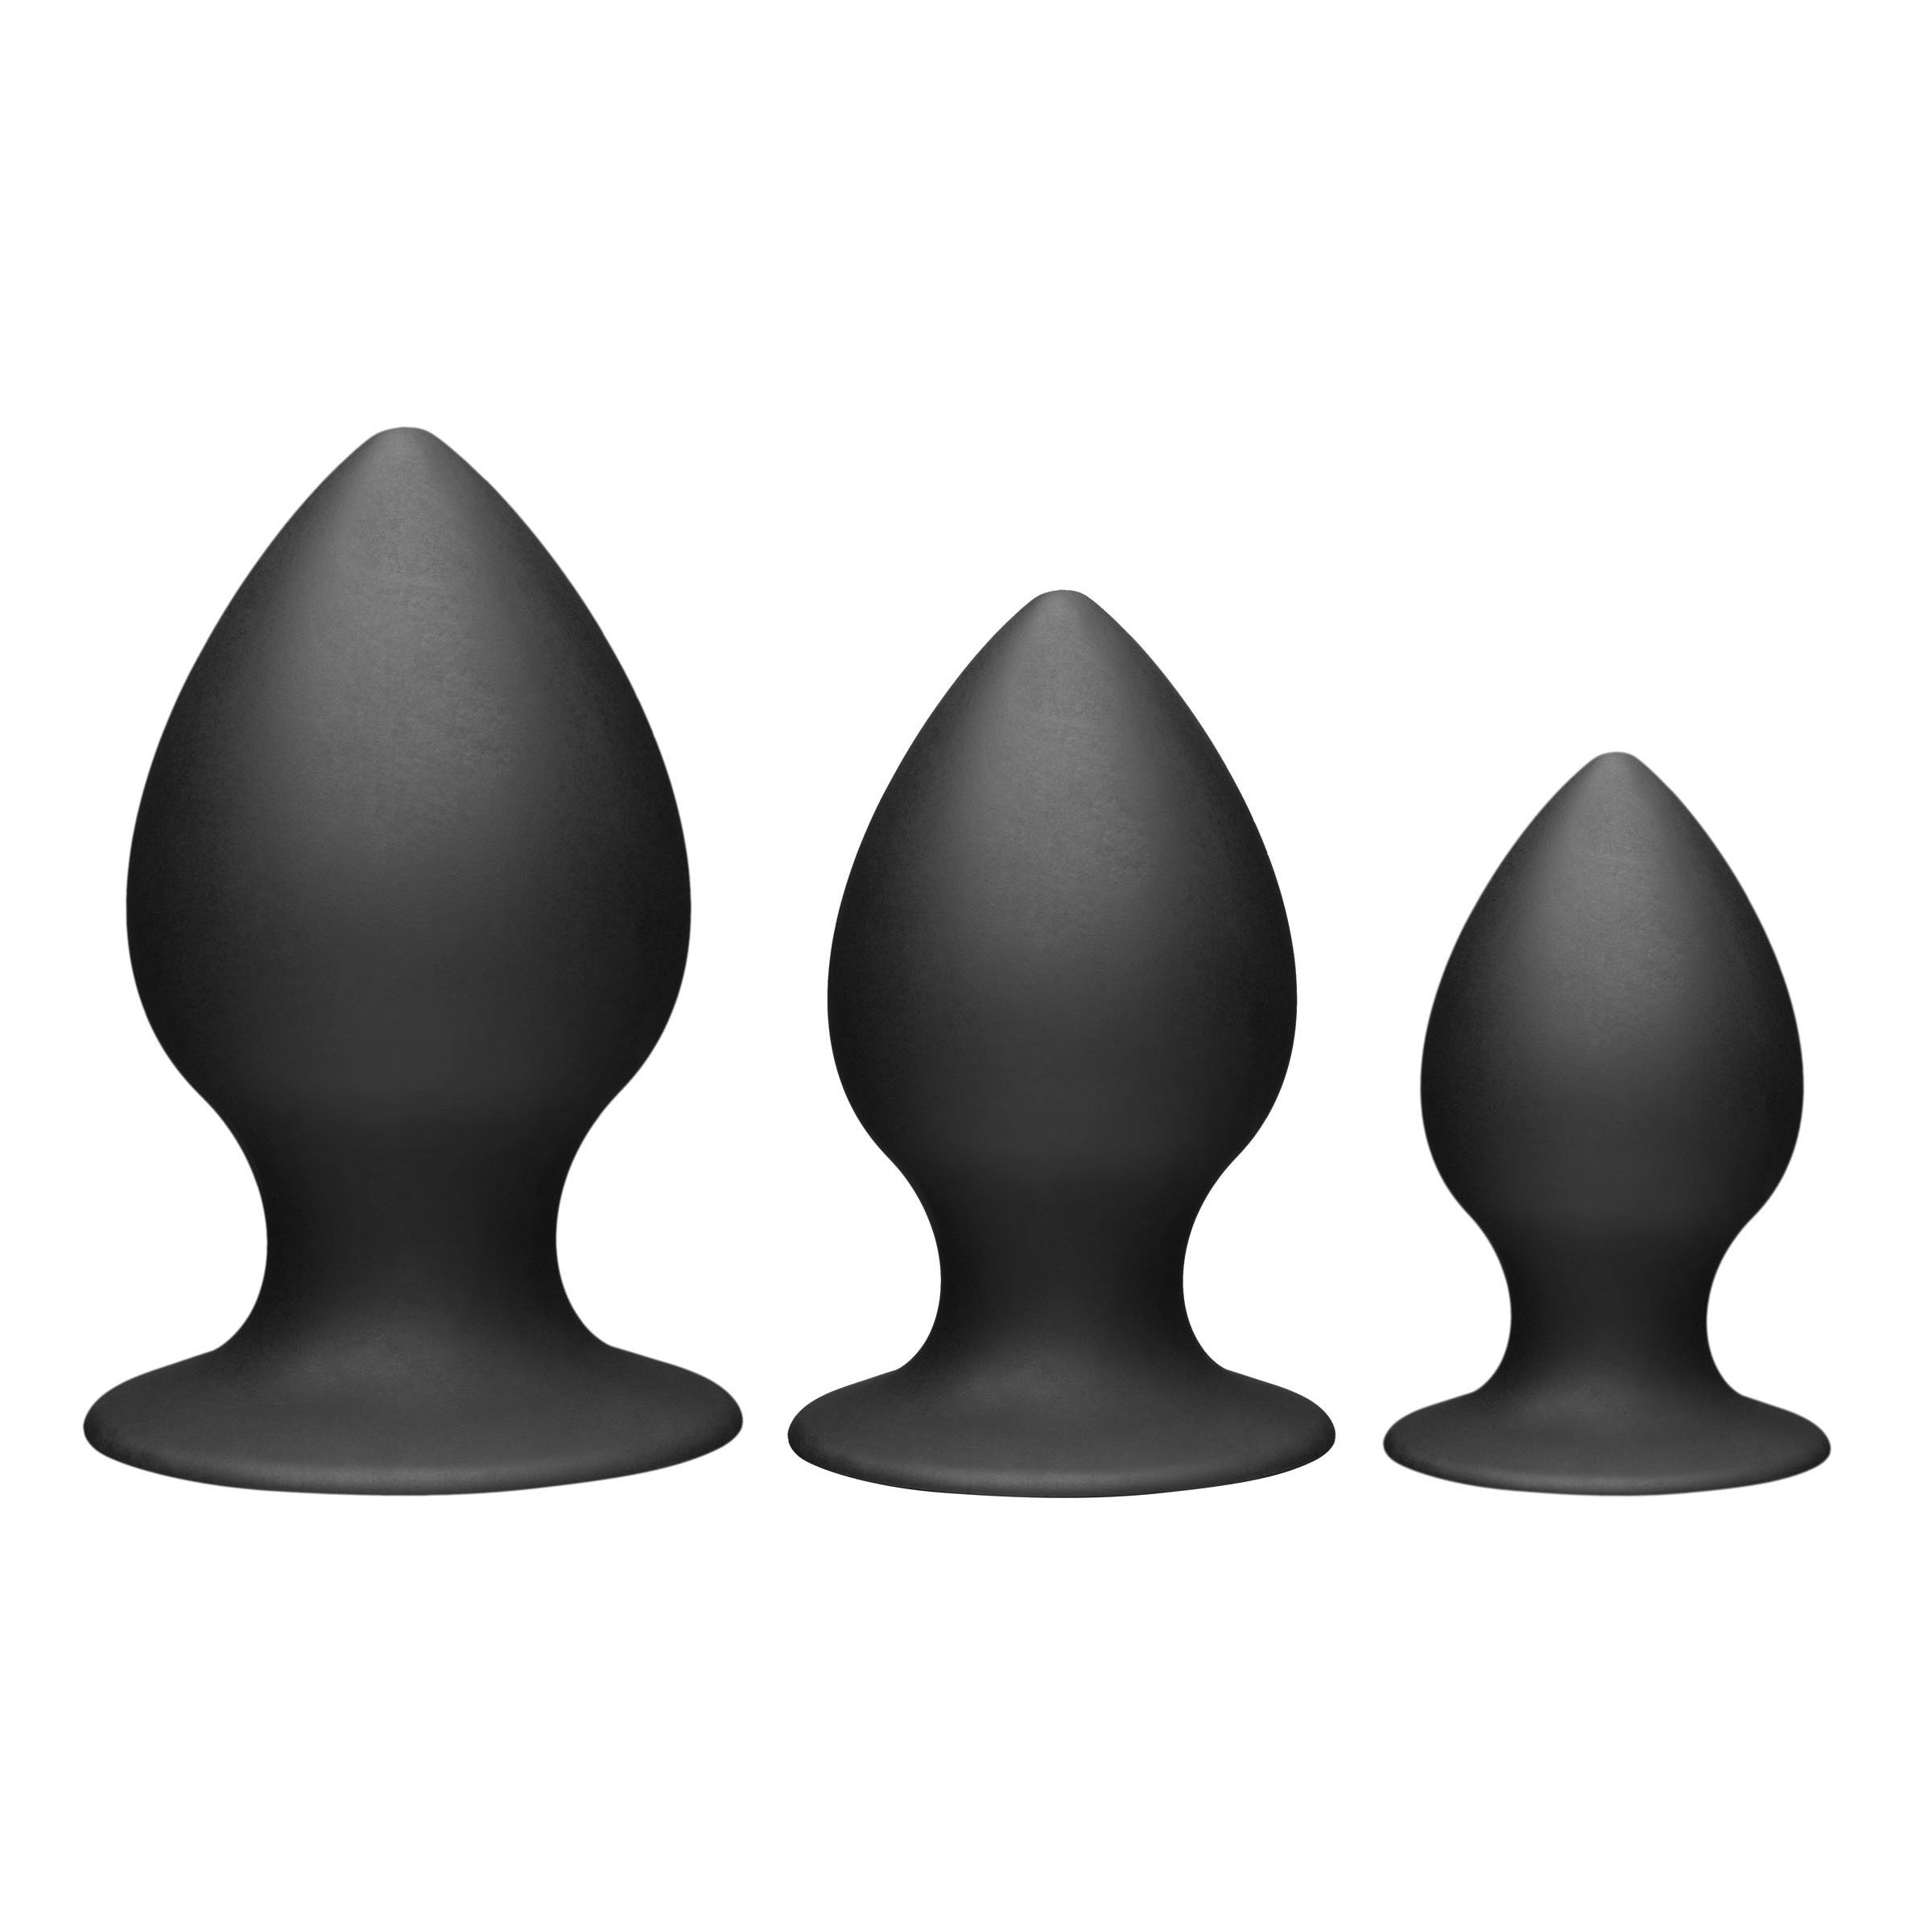 Tom of Finland Large Silicone Anal Plug